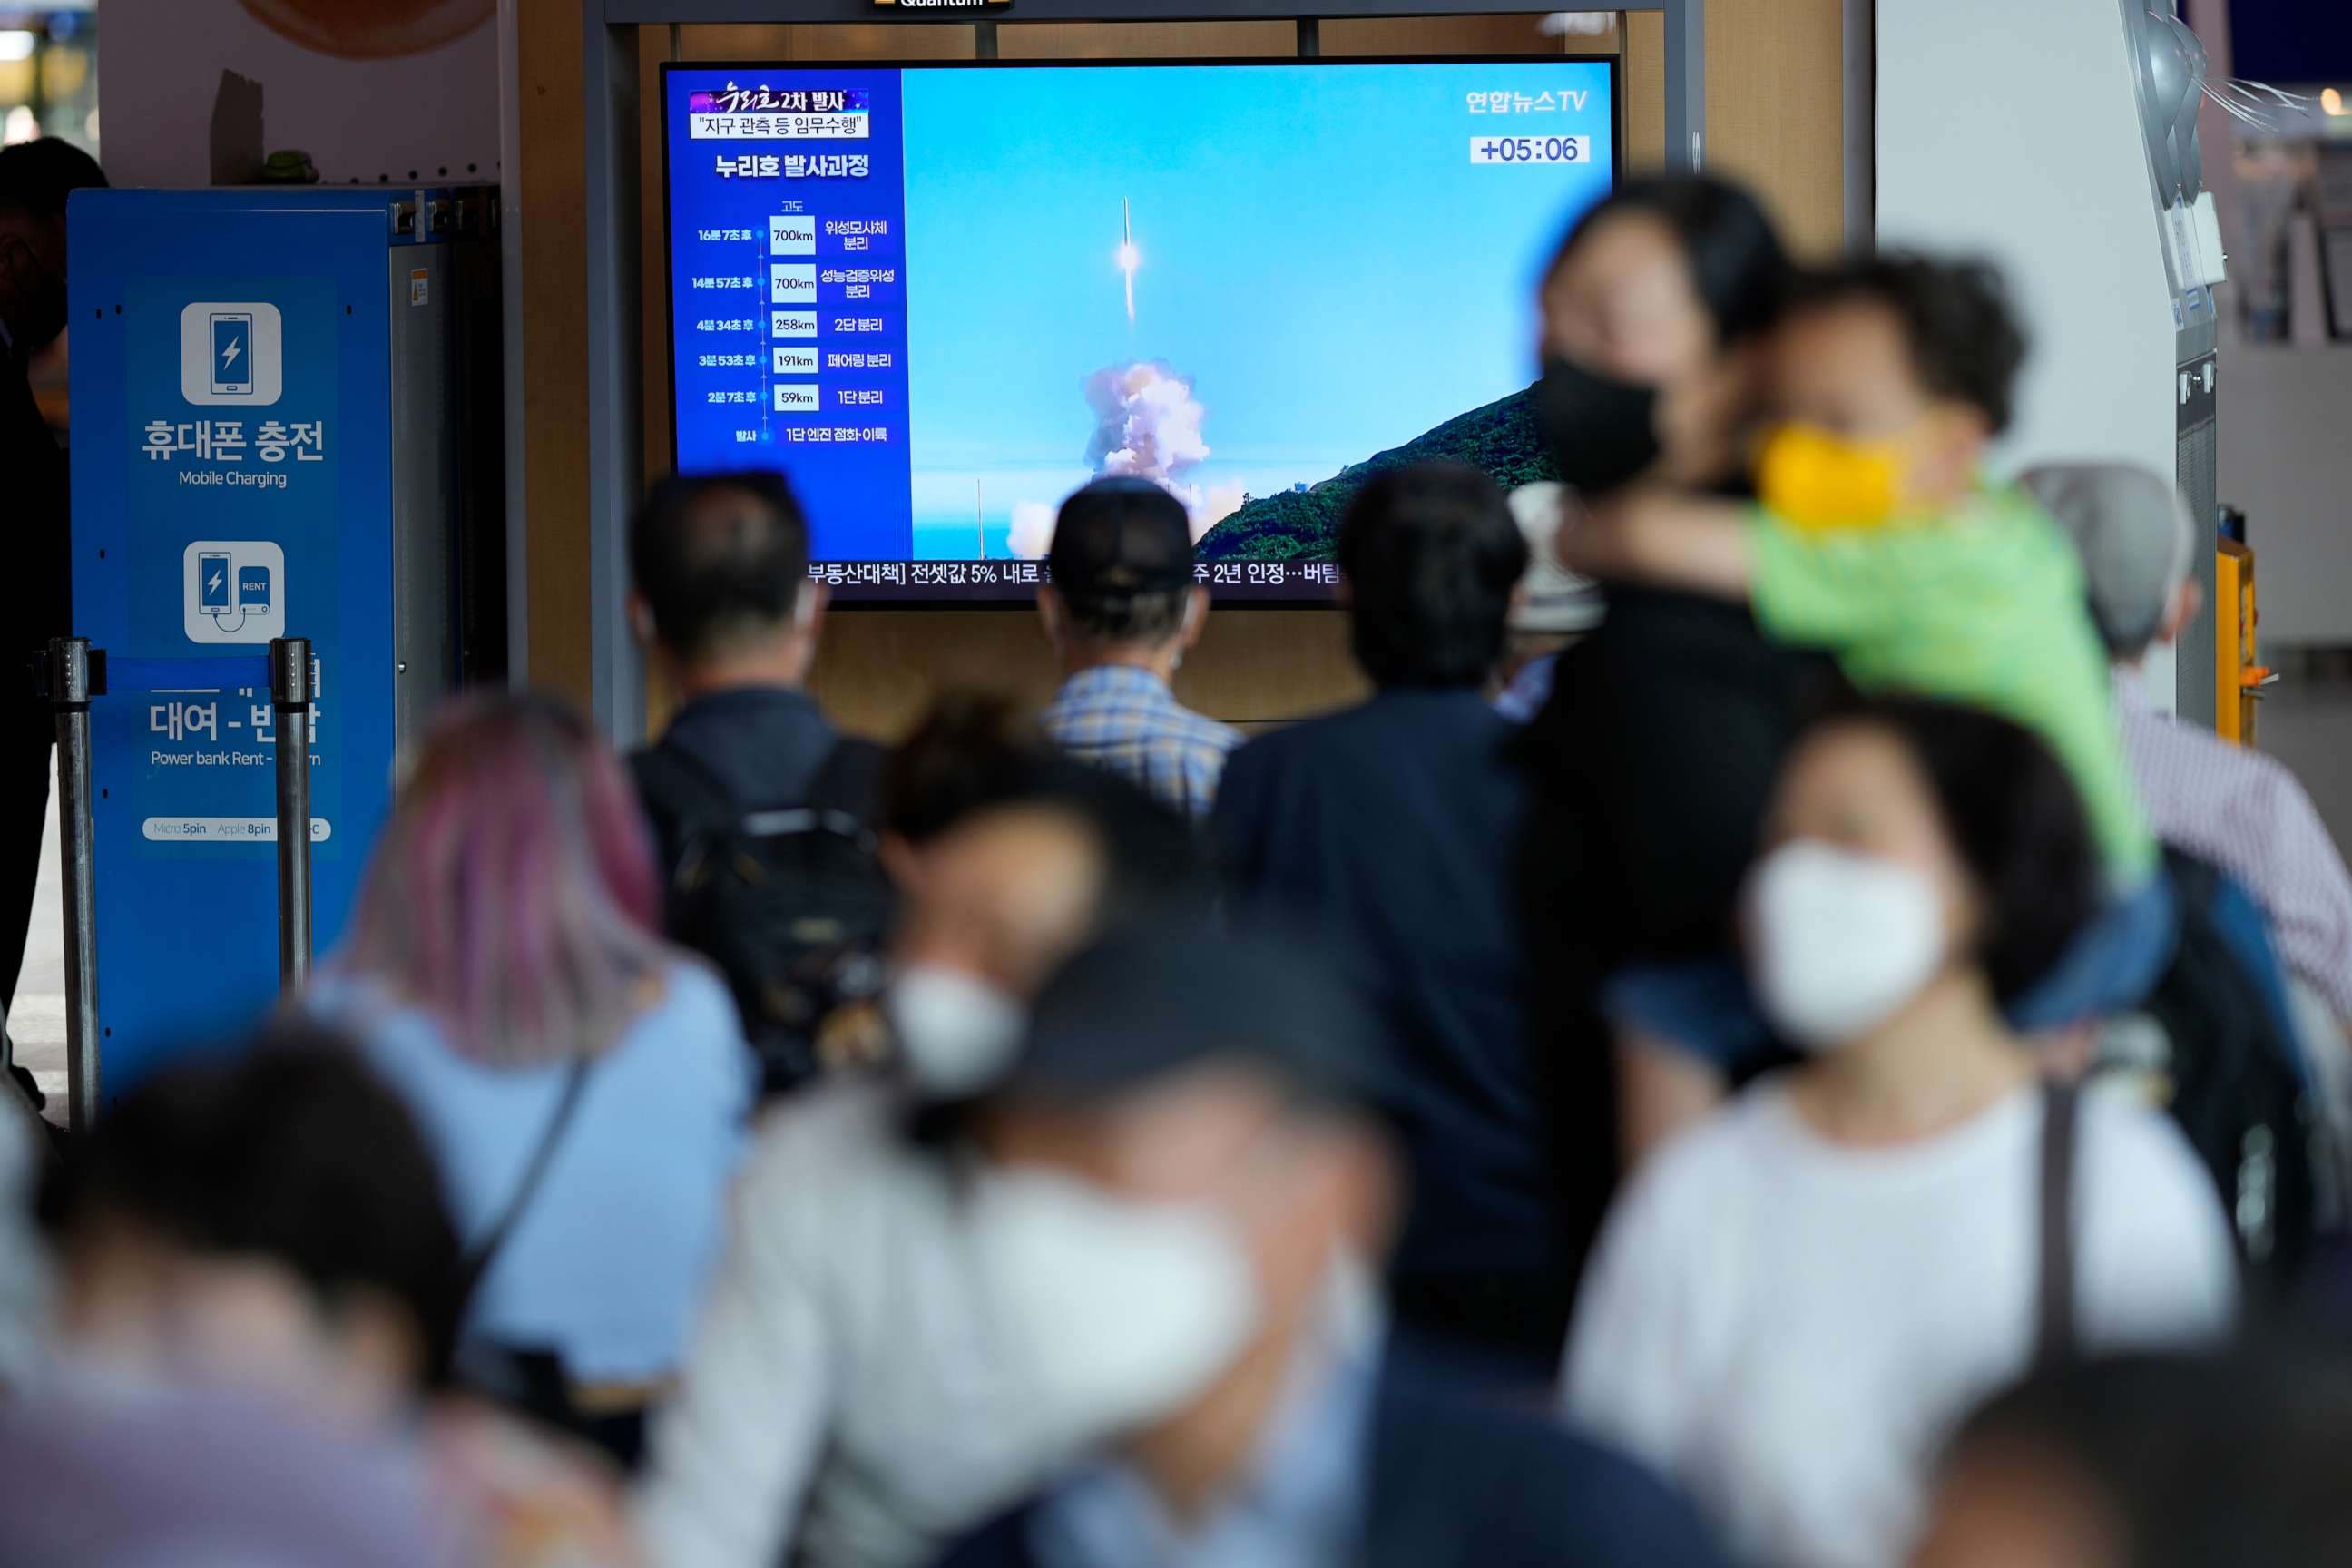 PHOTO: People watch a TV screen showing a news program about the country's rocket launch at a train station in Seoul, South Korea, June 21, 2022.